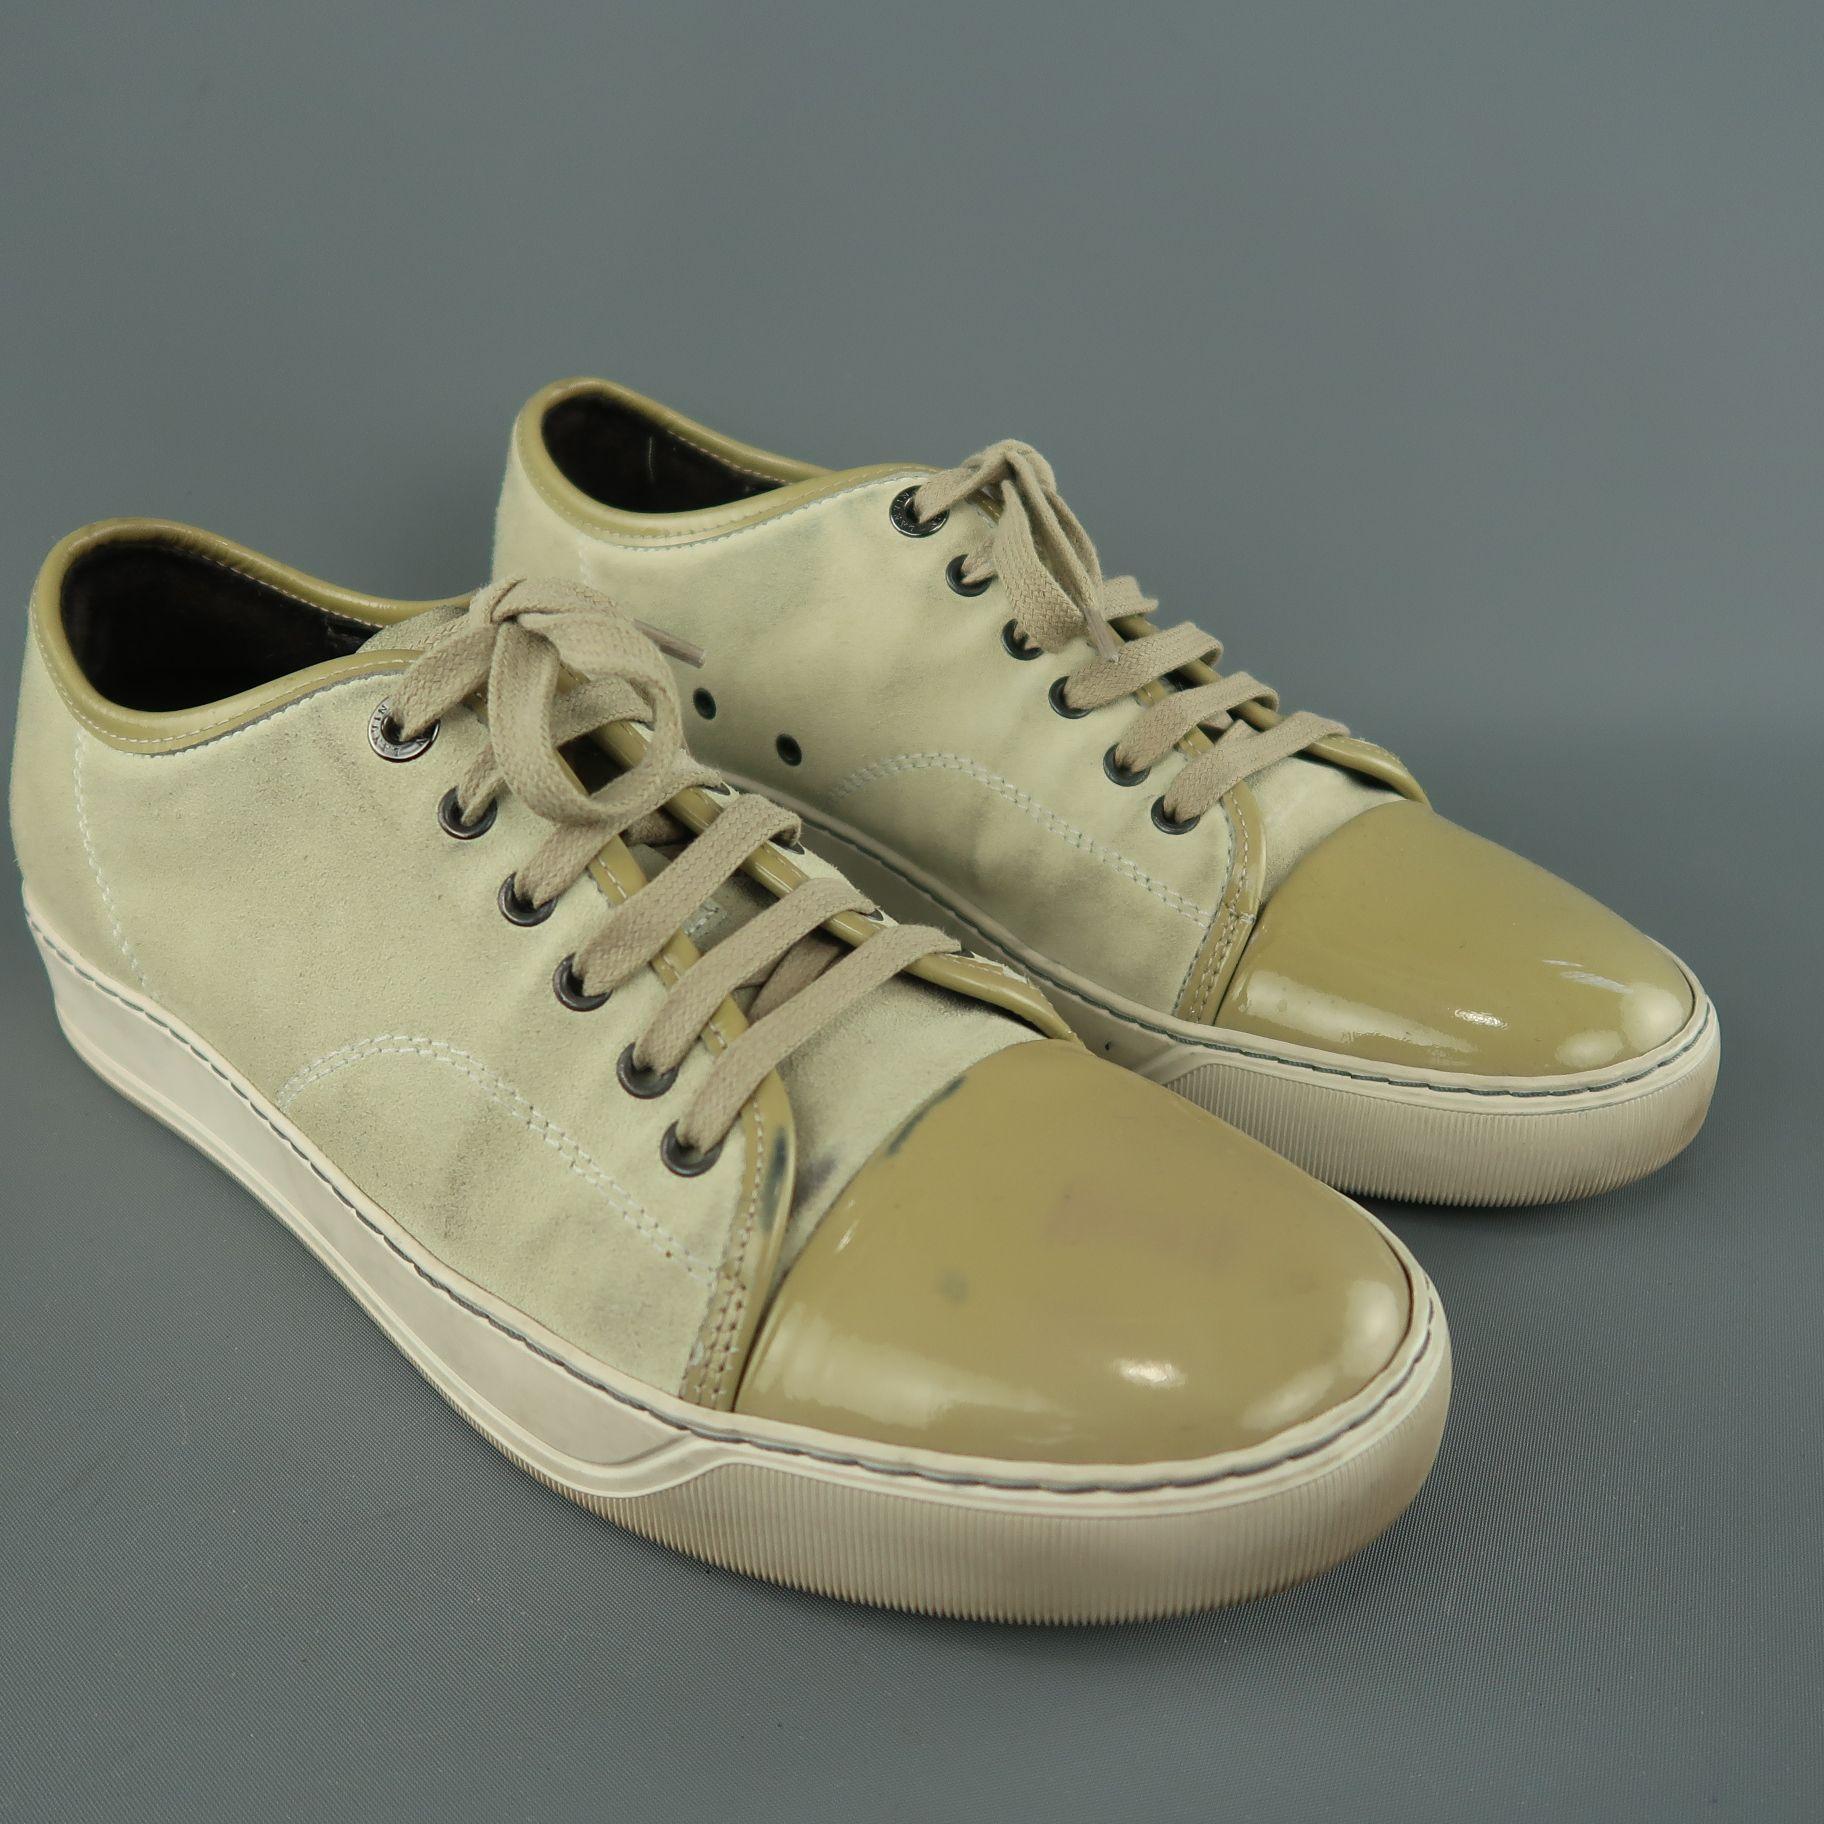 olive green lanvin sneakers